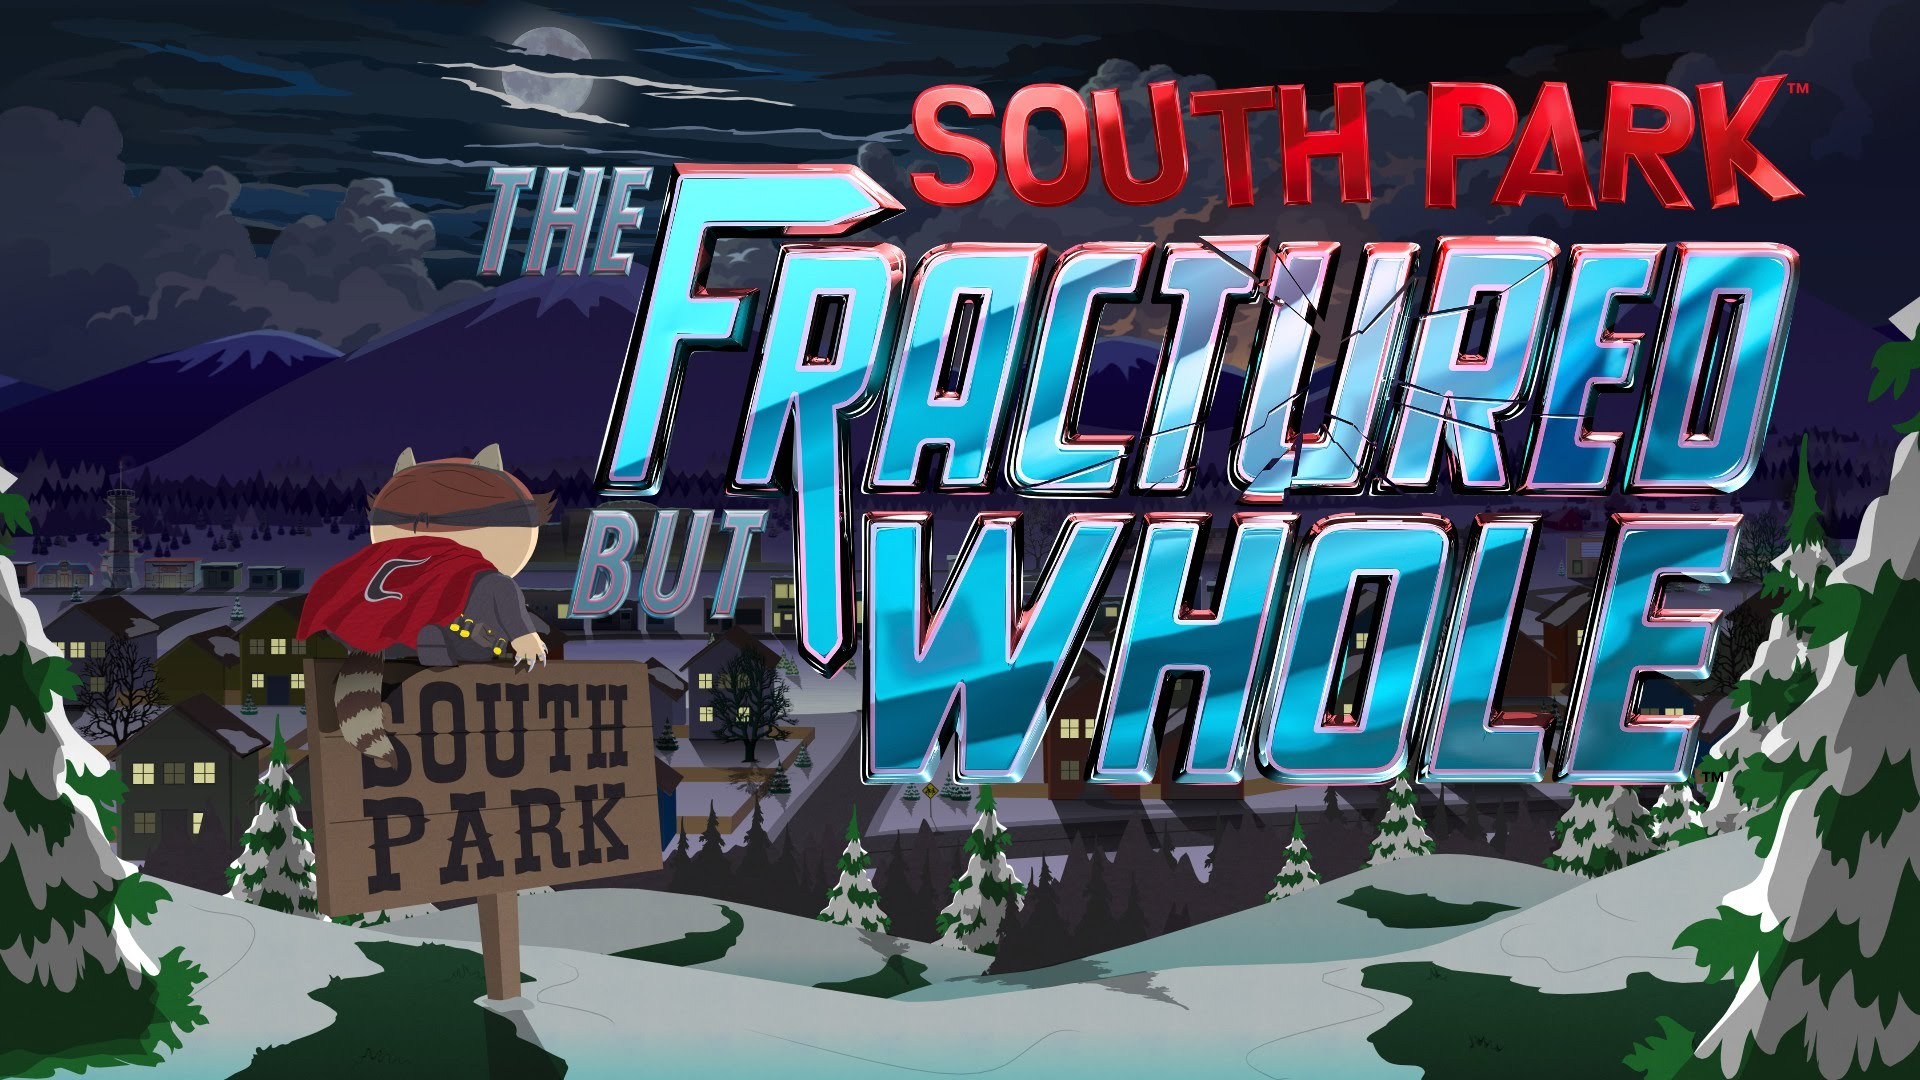 1920x1080 South Park: The Fractured But Whole